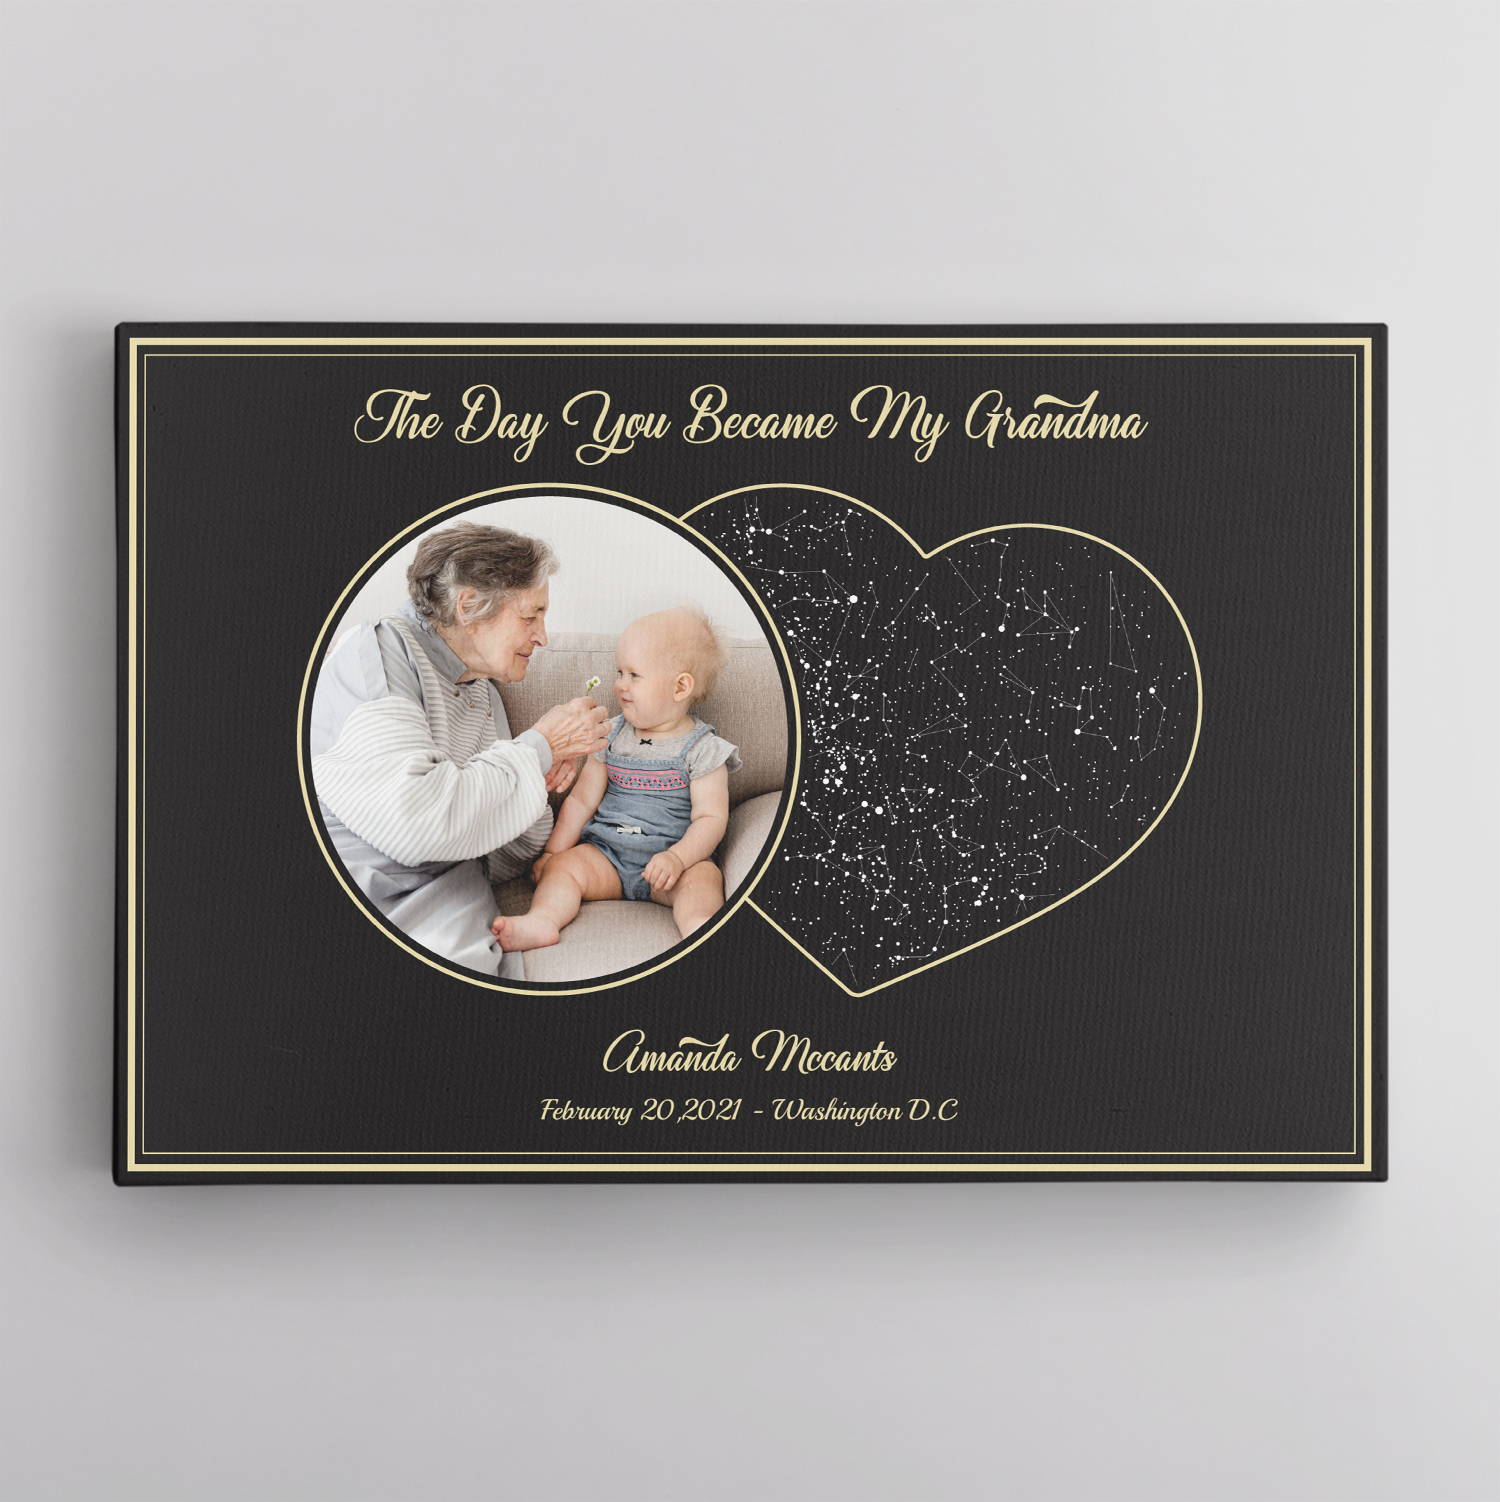 Do you want to keep "the day you became my grandma" conspicuous? Well, this personalized star map canvas may be the most suitable choice for a new grandma gift. Just add the date and location to mark the milestone. Customization is never easier!